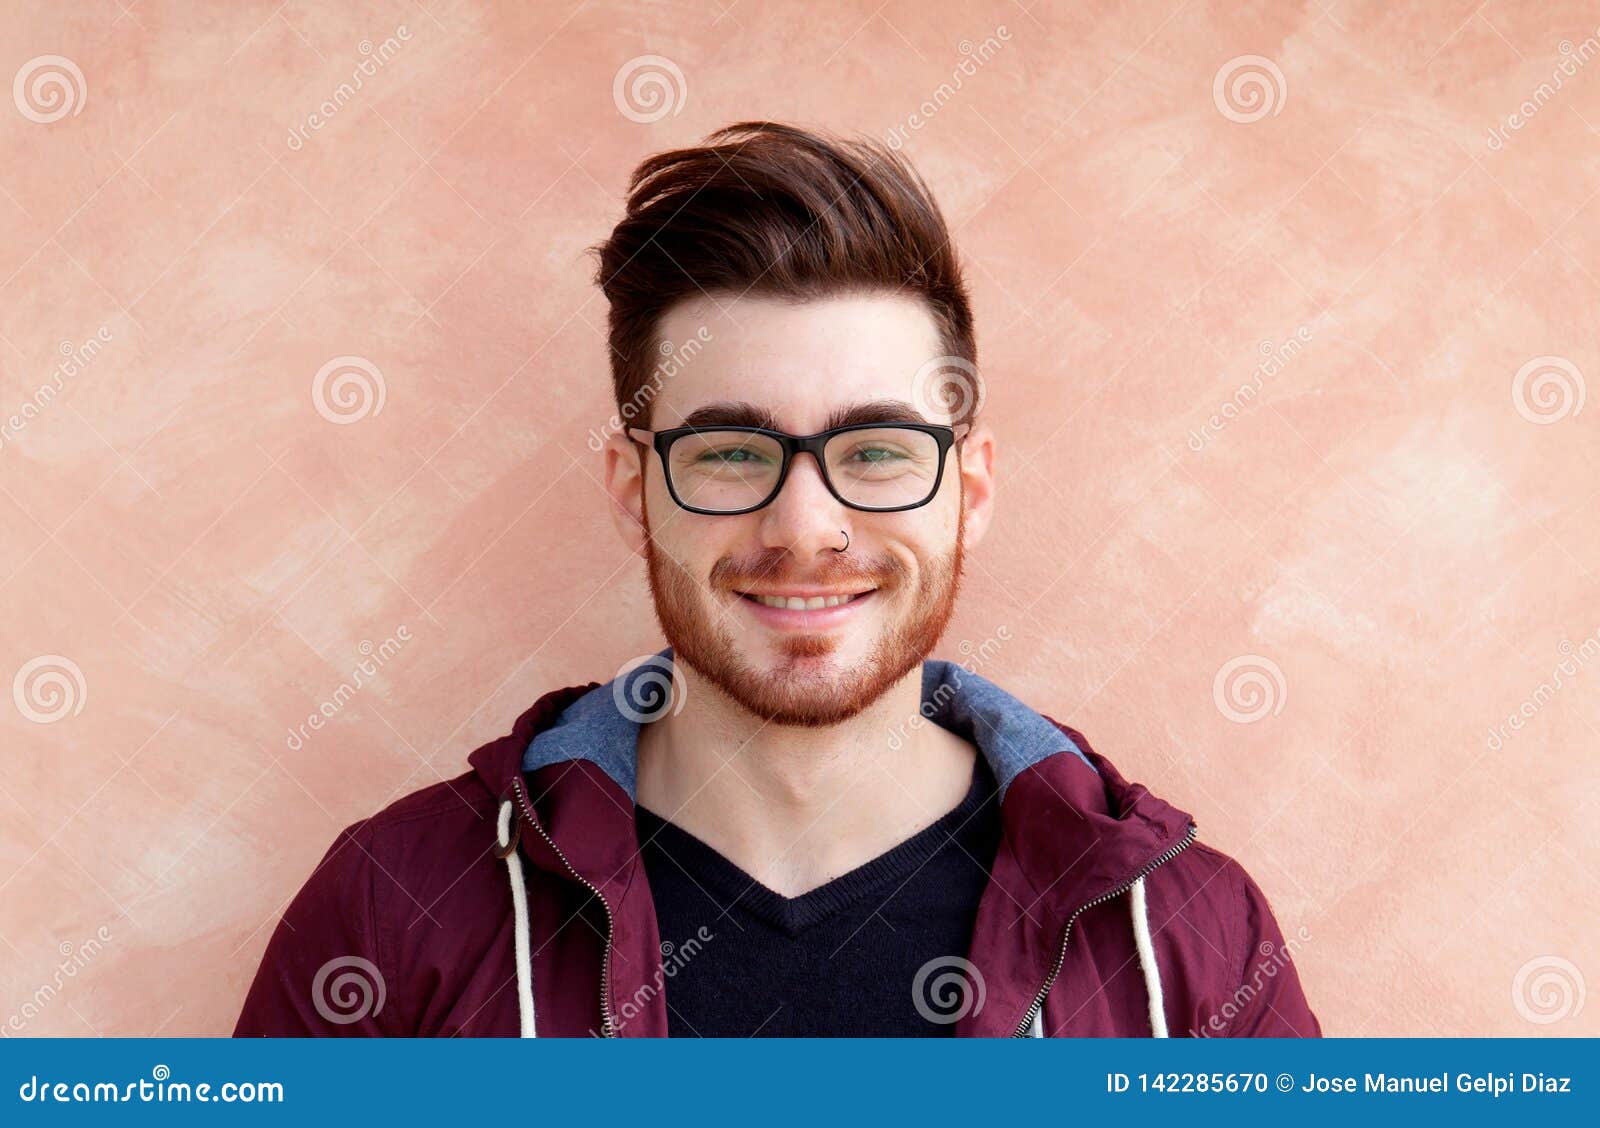 Cool Handsome Guy with Glasses Stock Photo - Image of attractive ...